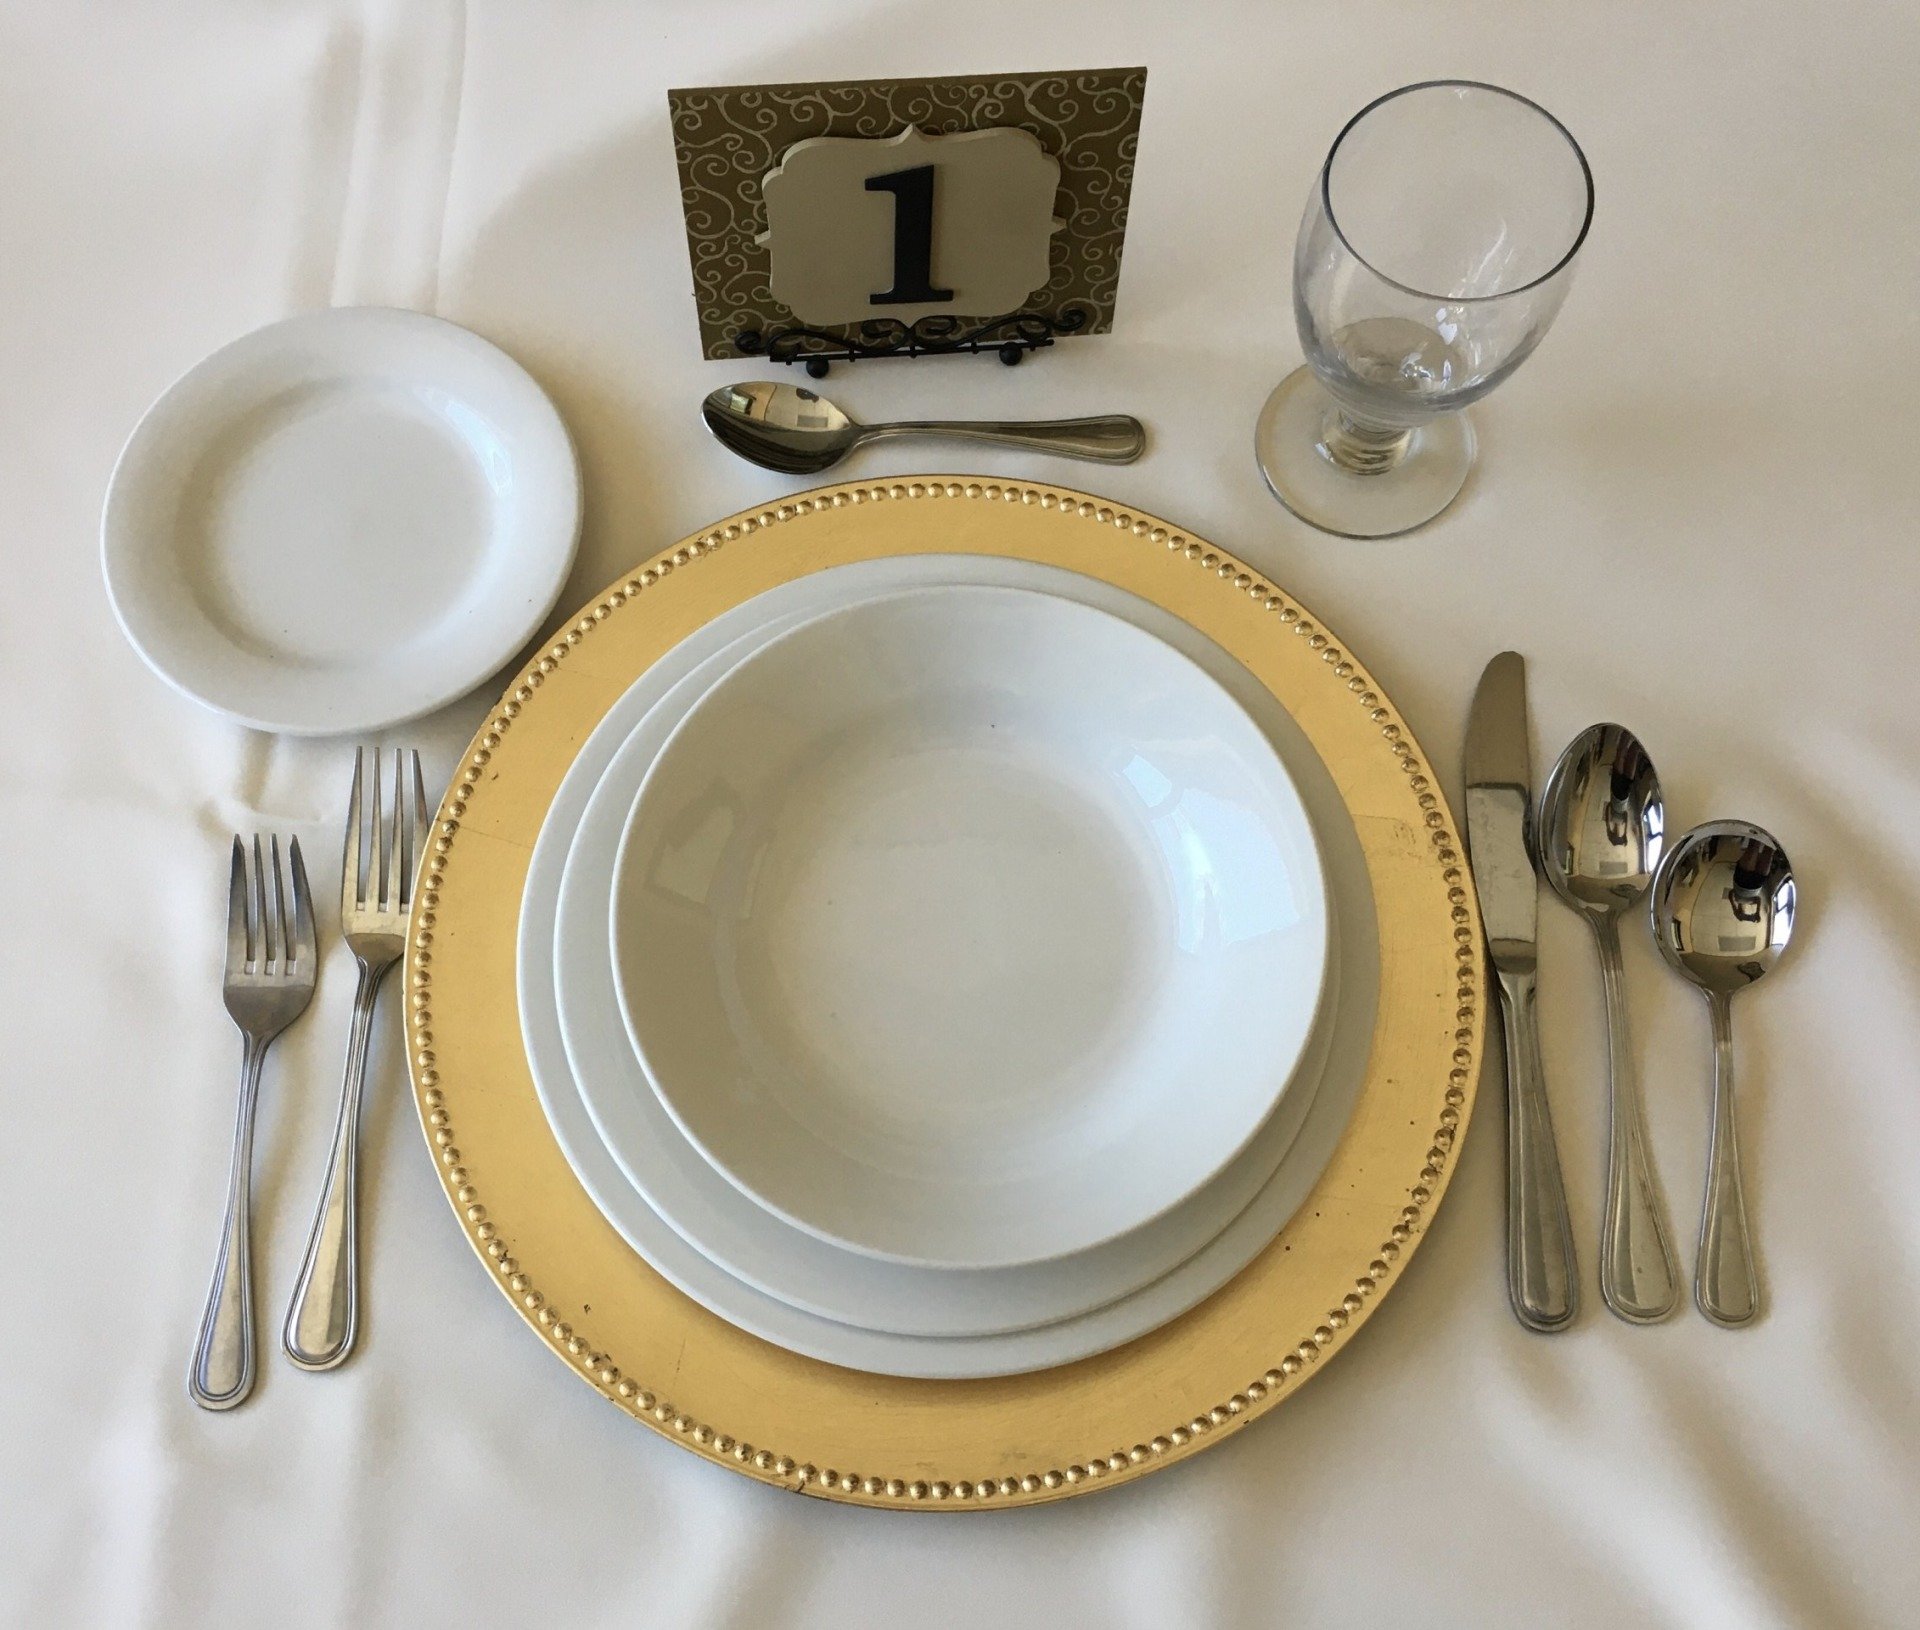 sample event place setting with flatware, glassware, dinnerware, charger, and table number